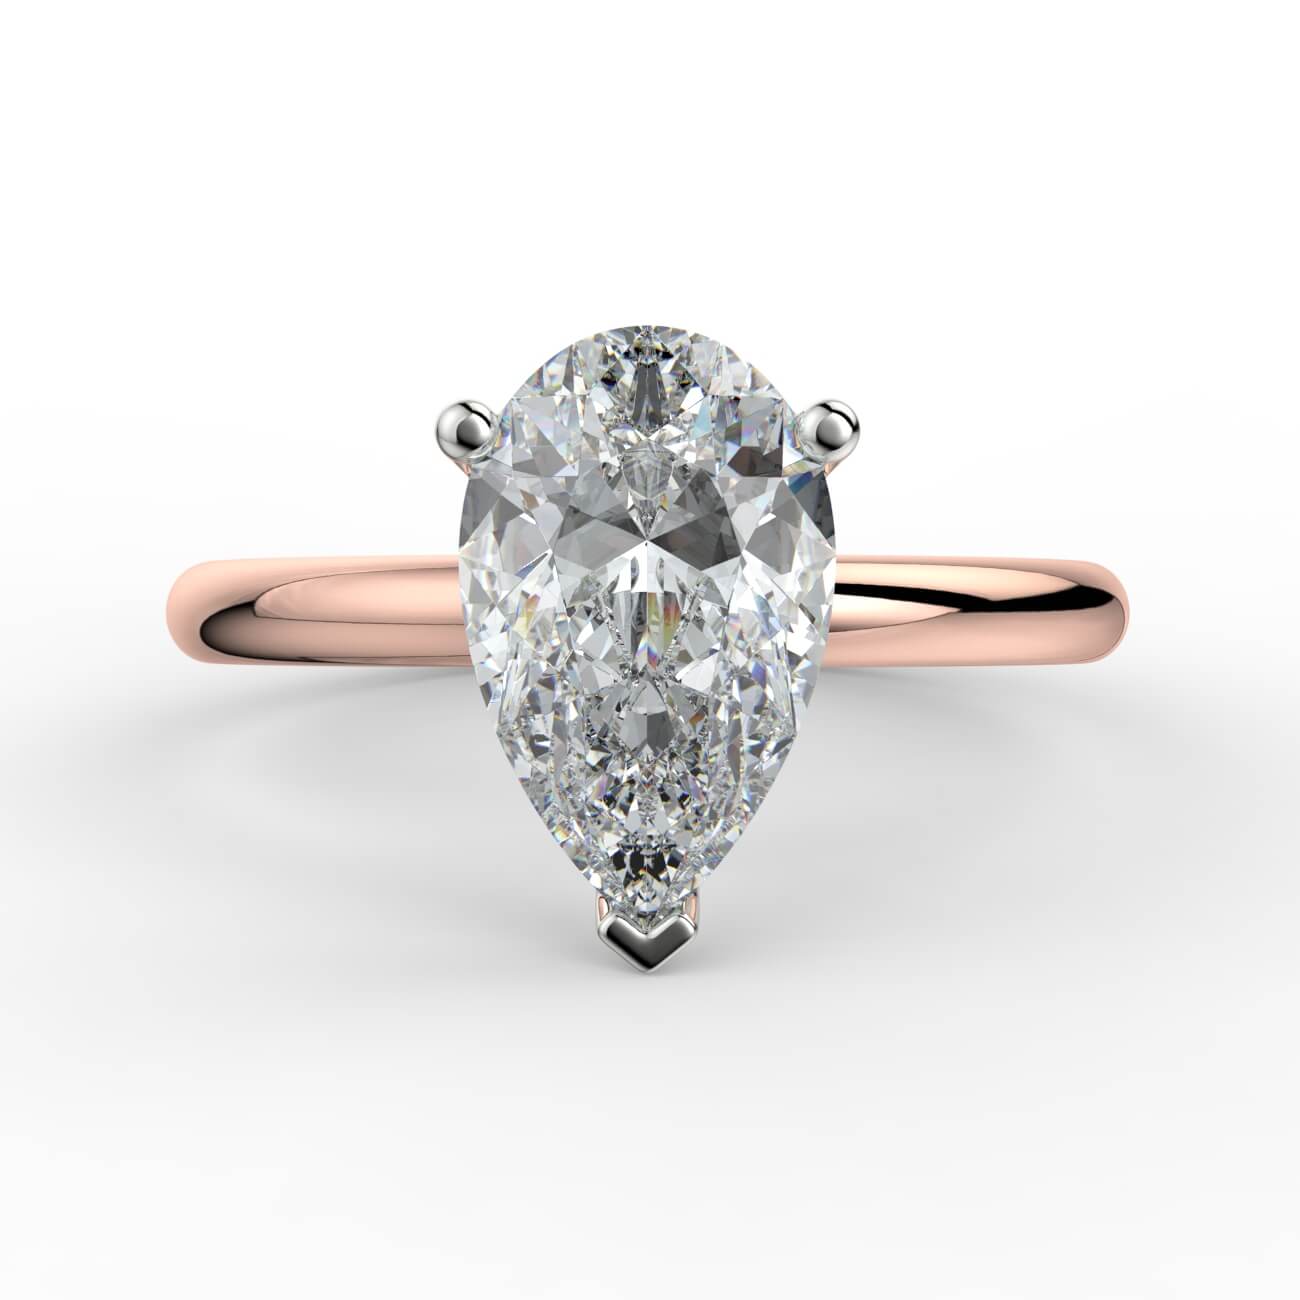 Solitaire pear shape diamond engagement ring in white and rose gold – Australian Diamond Network